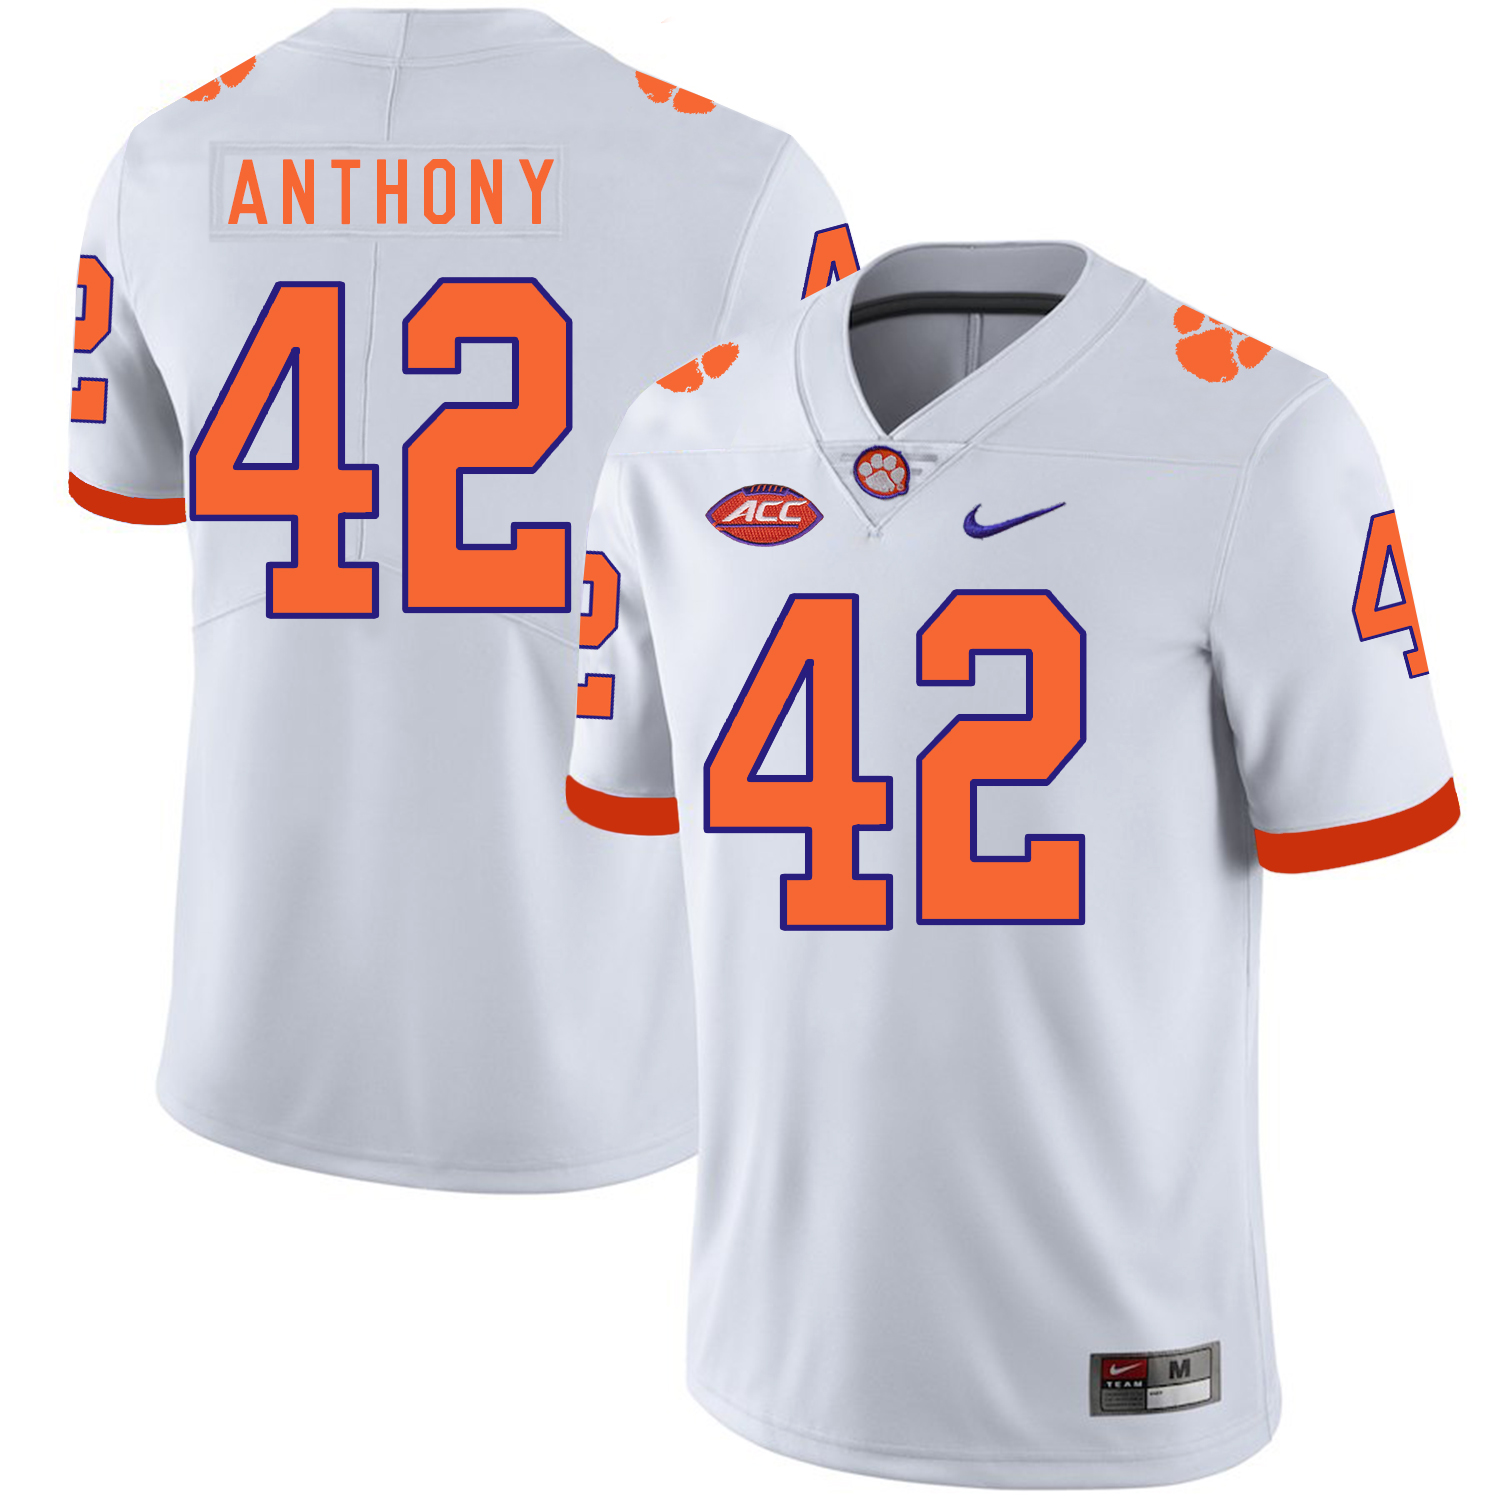 Clemson Tigers 42 Christian Wilkins White Nike College Football Jersey